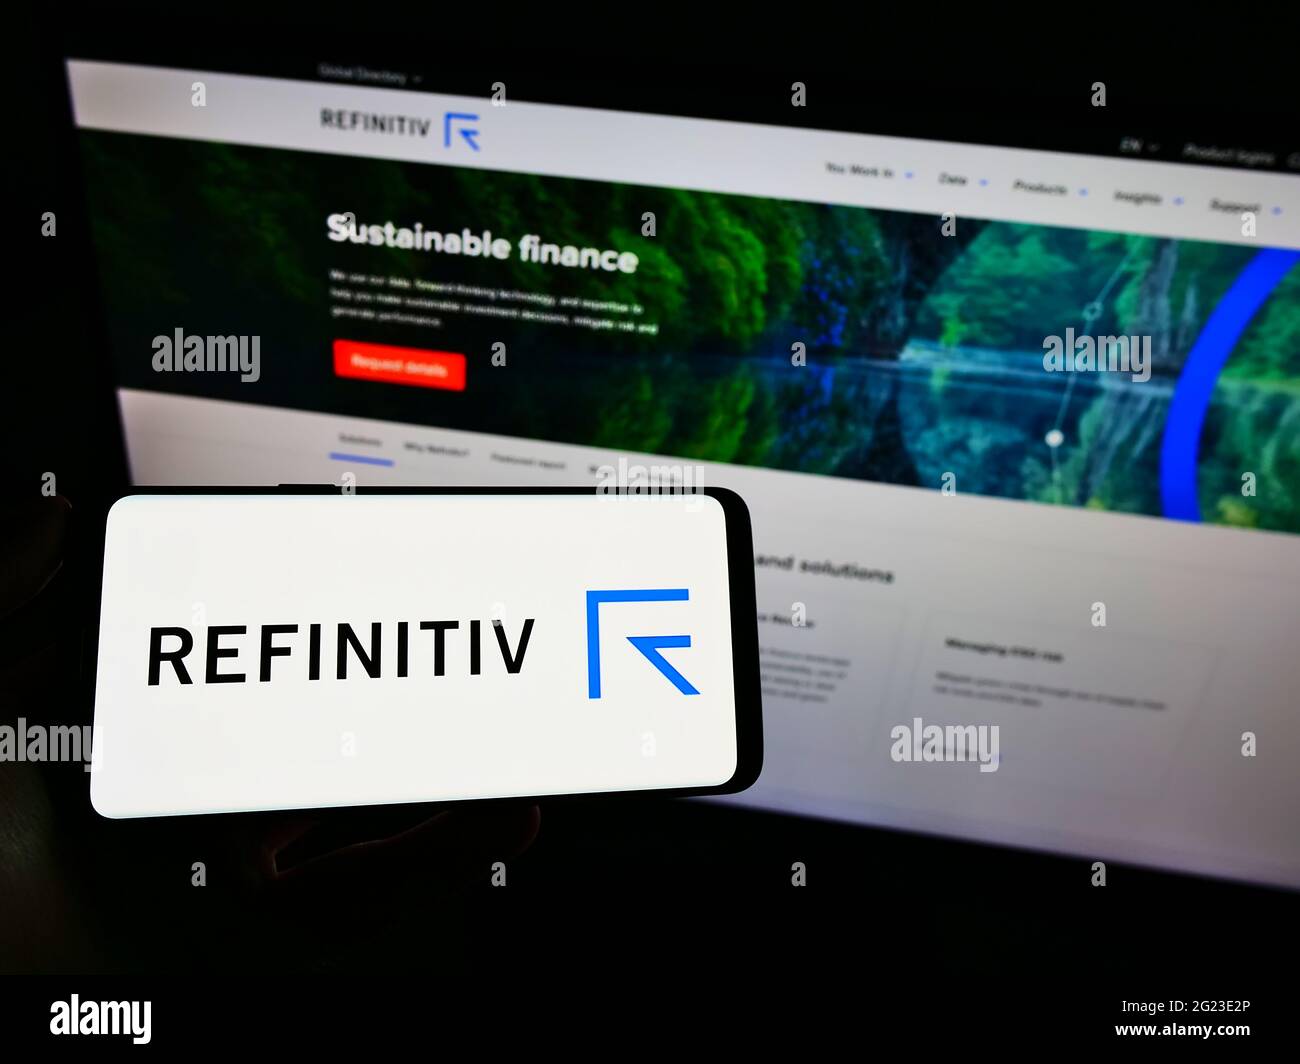 Person Holding Mobile Phone With Logo Of Financial Markets Data Comapny Refinitiv Limited On Screen In Front Of Web Page Focus On Phone Display Stock Photo Alamy